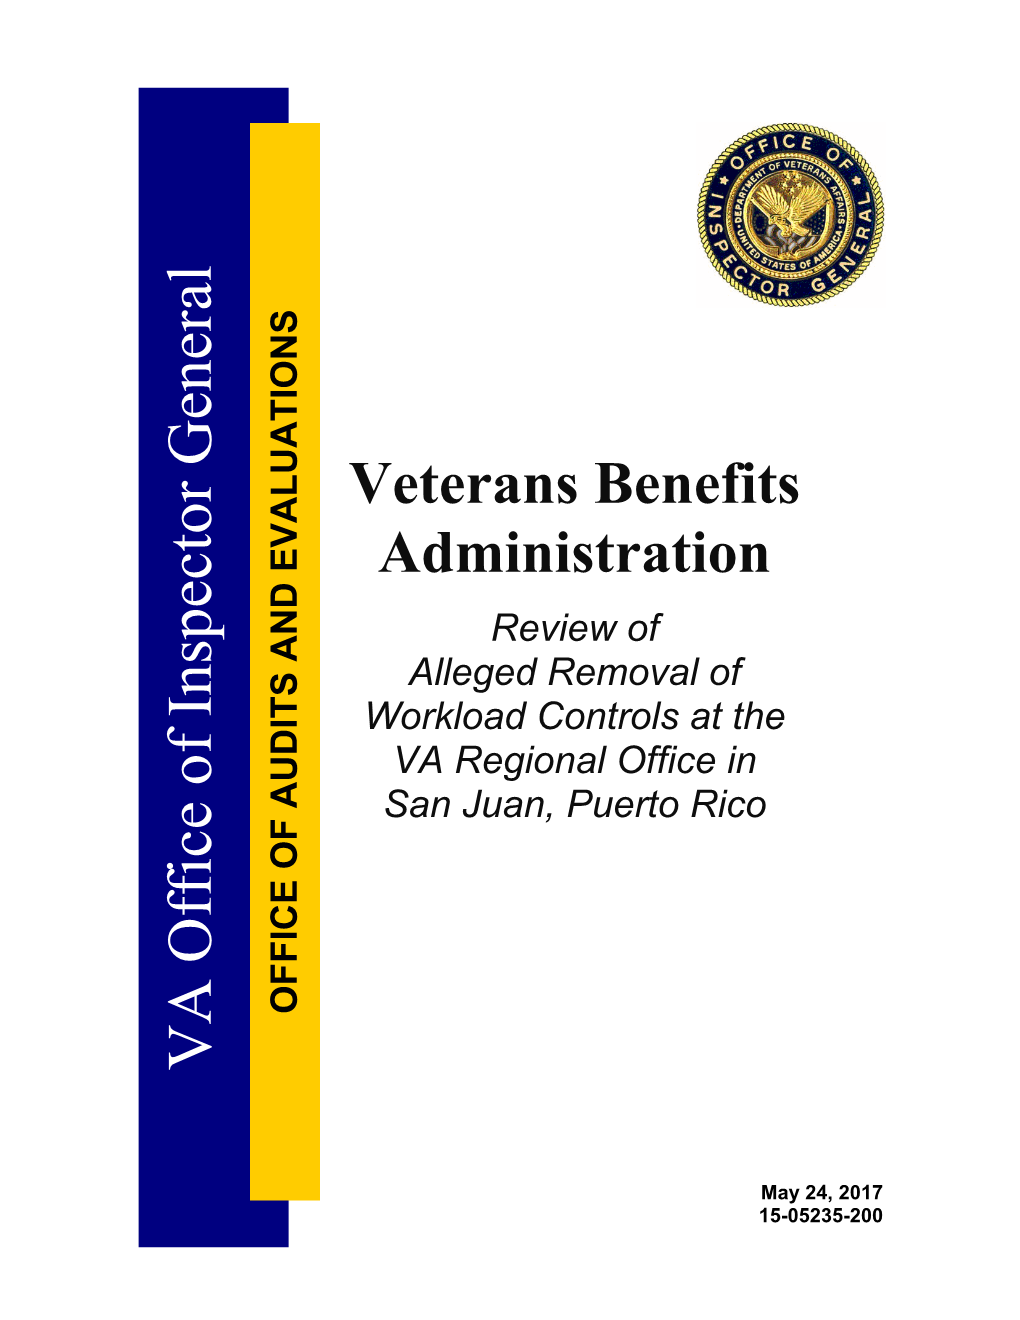 Review of Alleged Removal of Workload Controls at the VA Regional Office in San Juan, Puerto Rico OFFICE of AUDITS and EVALUATIONS VA Office of Inspector General